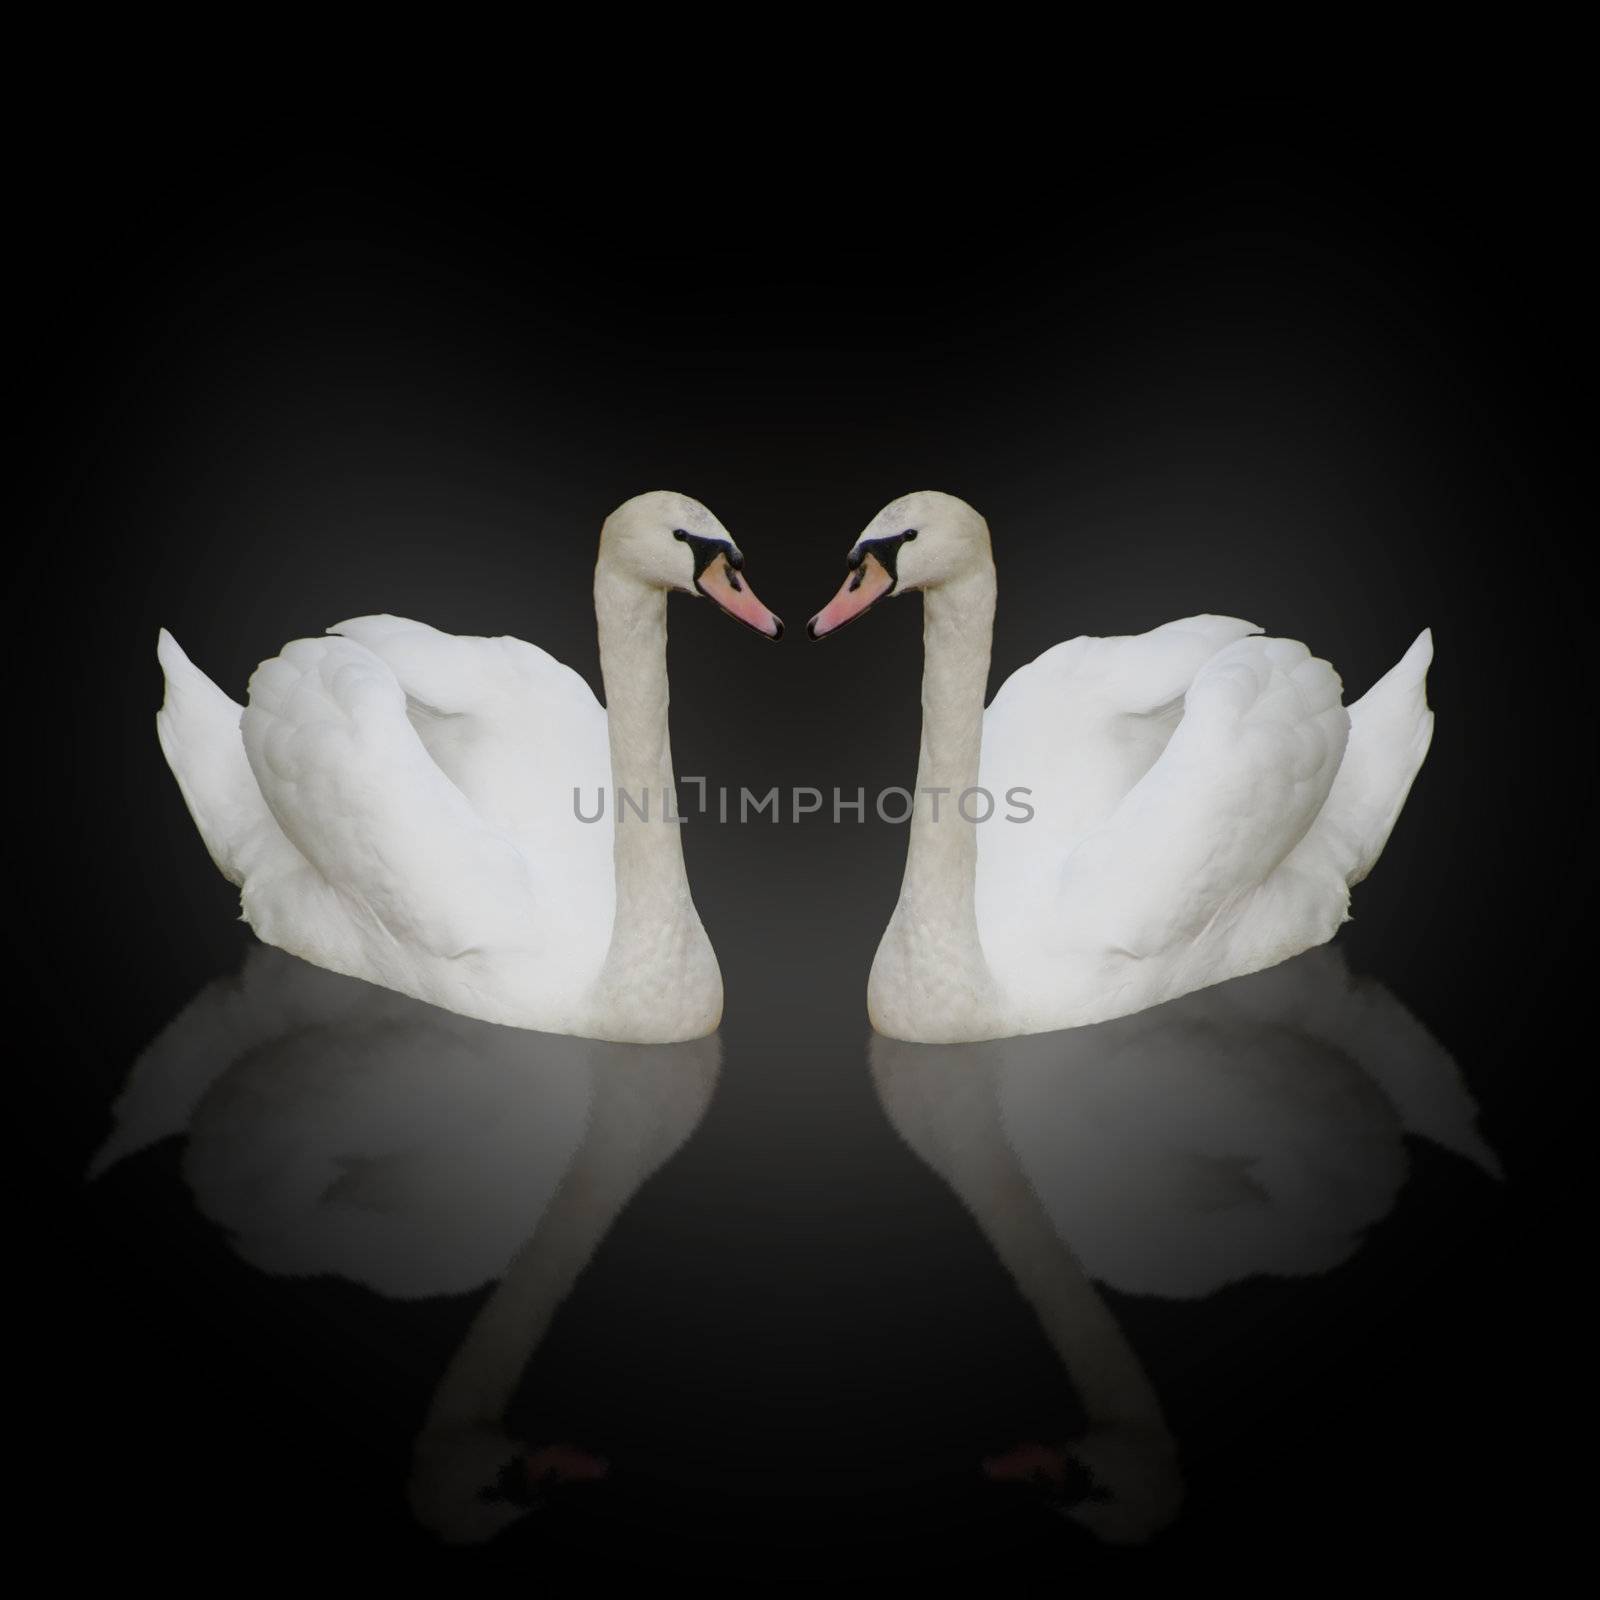 two swans with reflection over black